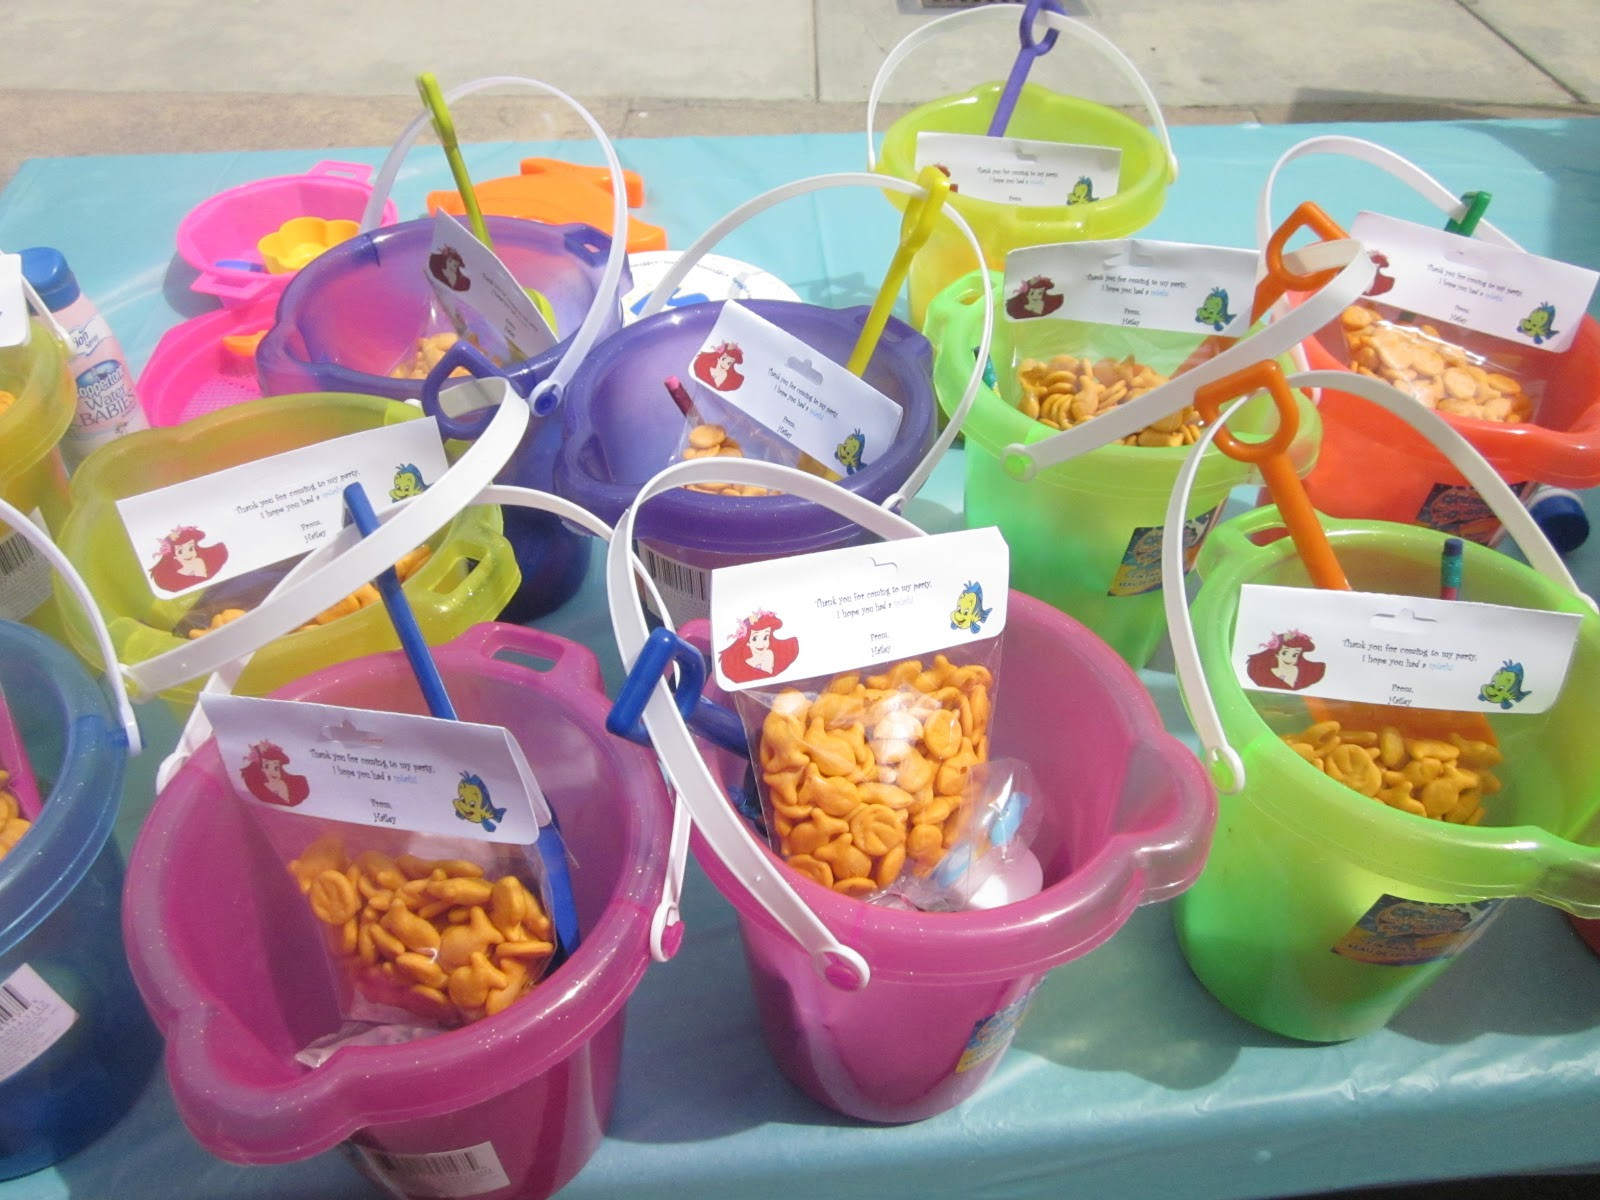 Mermaid Party Favors Ideas
 Pintresting Challenge Little Mermaid party